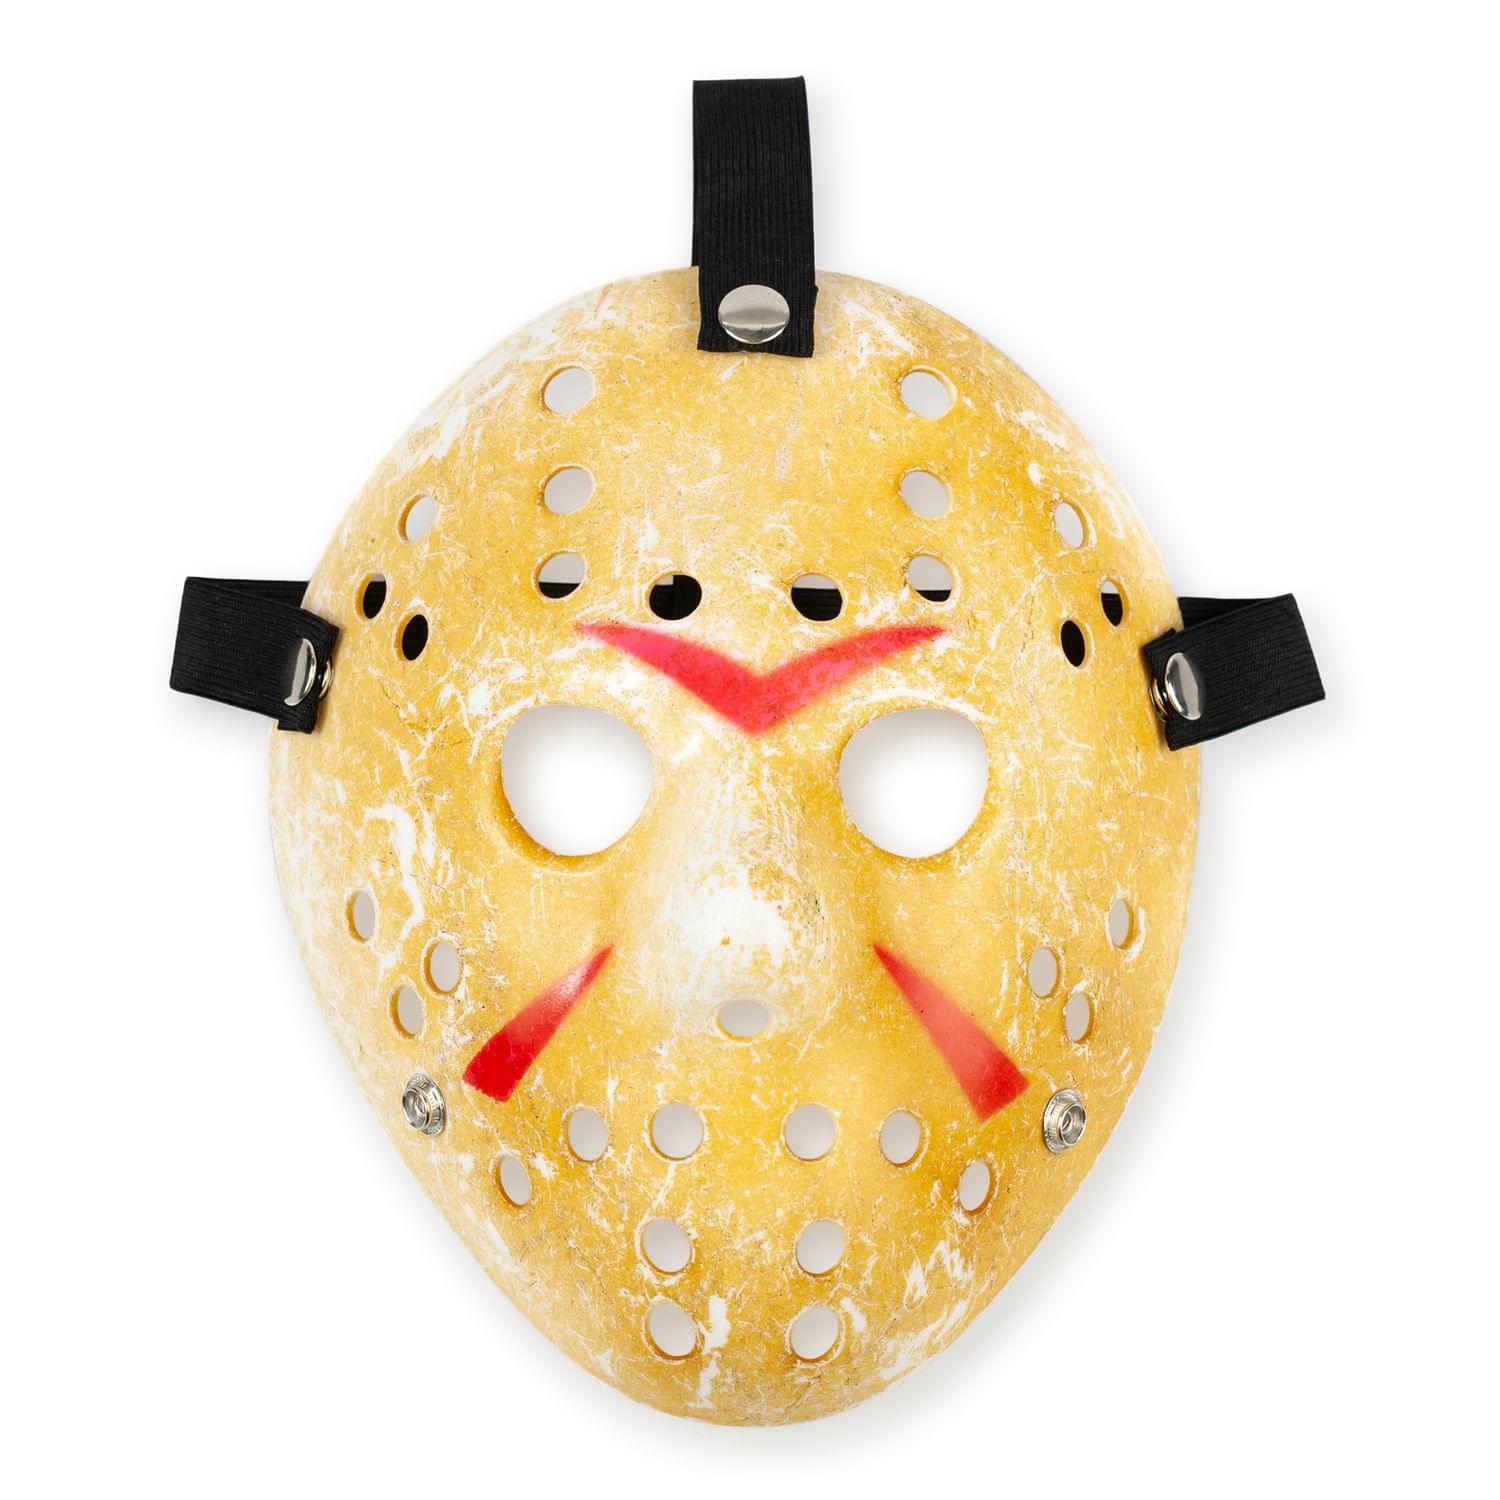 Original Jason Voorhees Mask and Costumes – Order Now